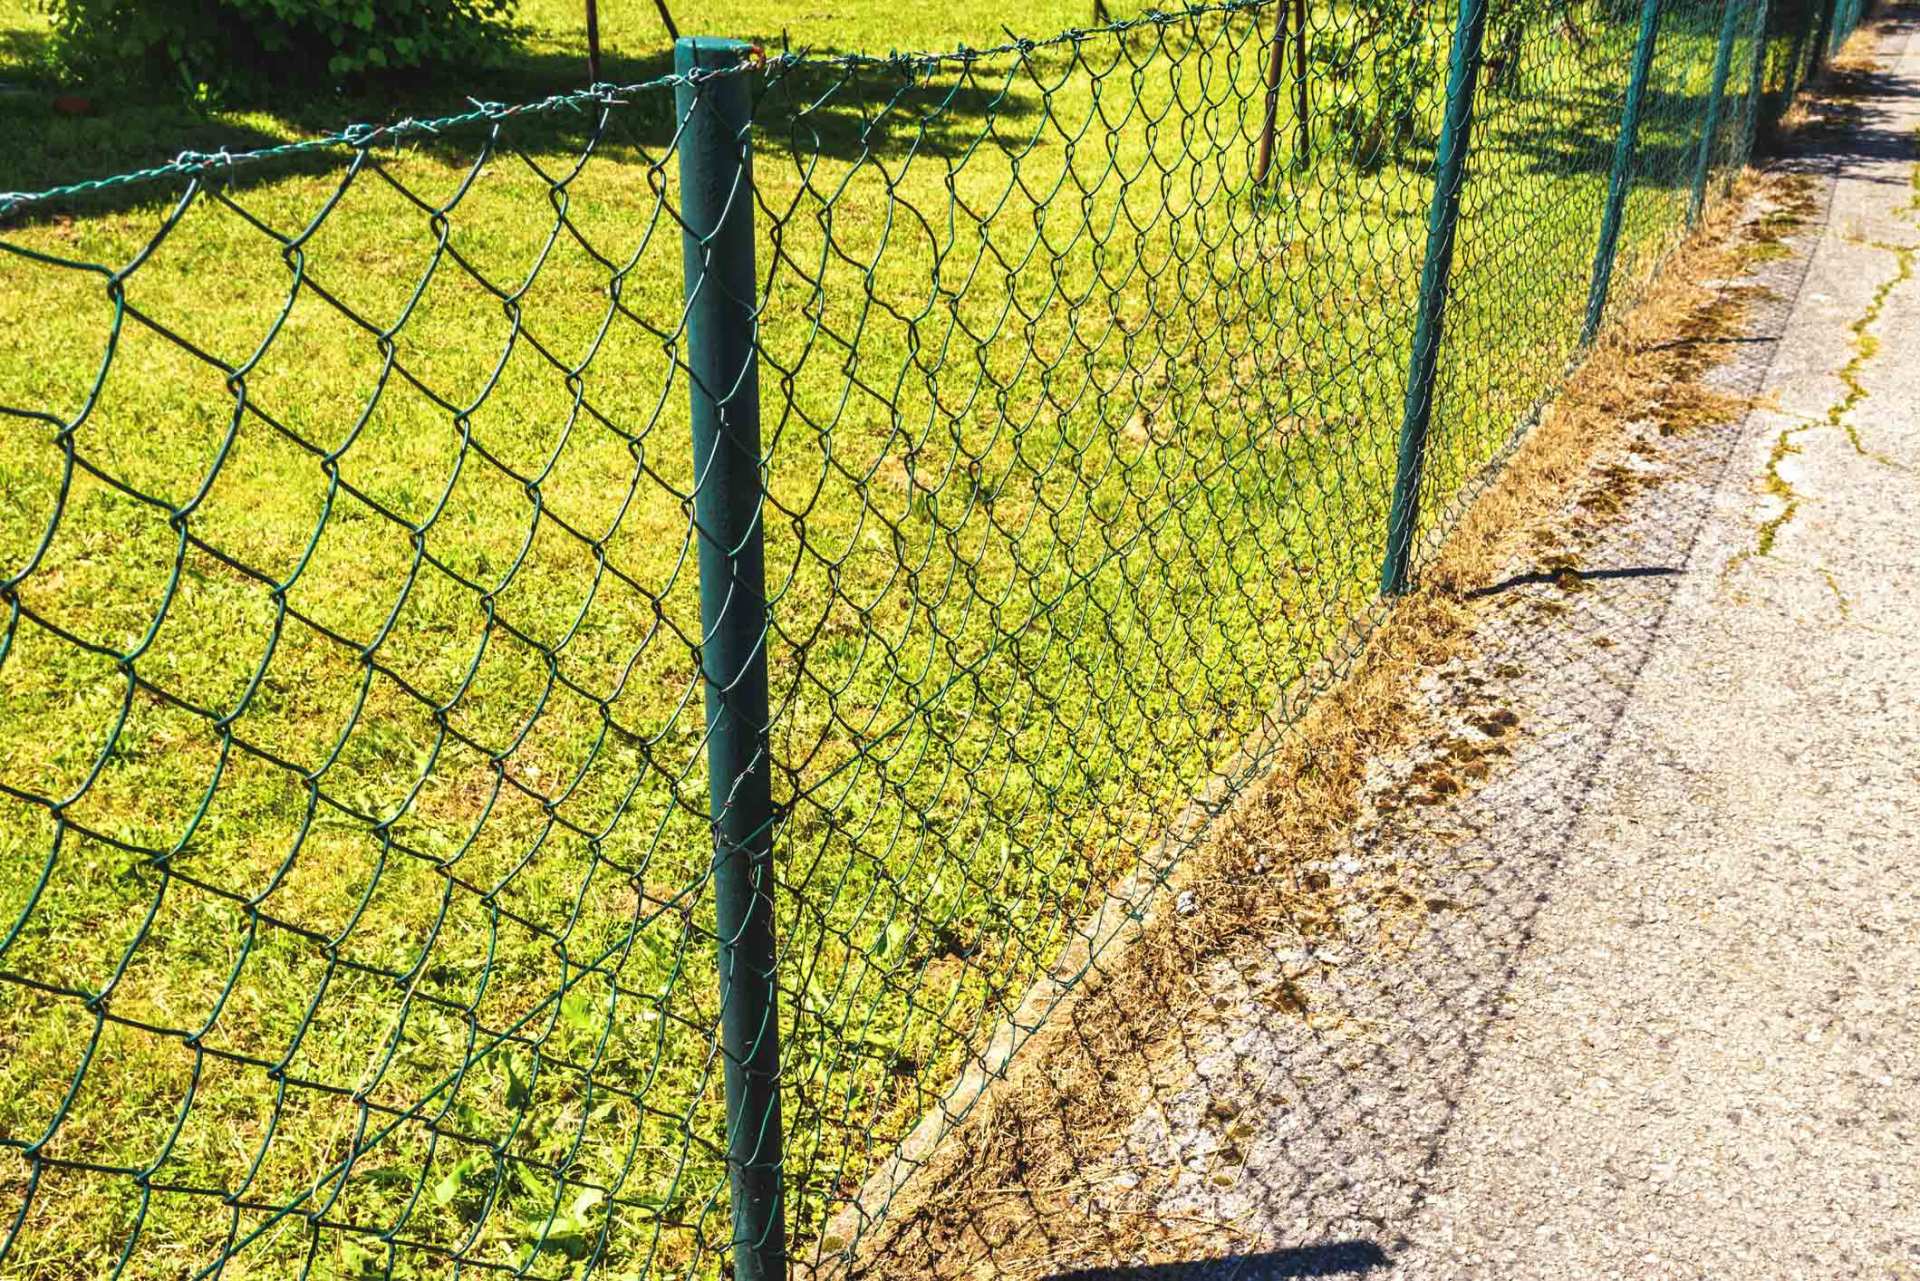 can a dog chew through a chain link fence